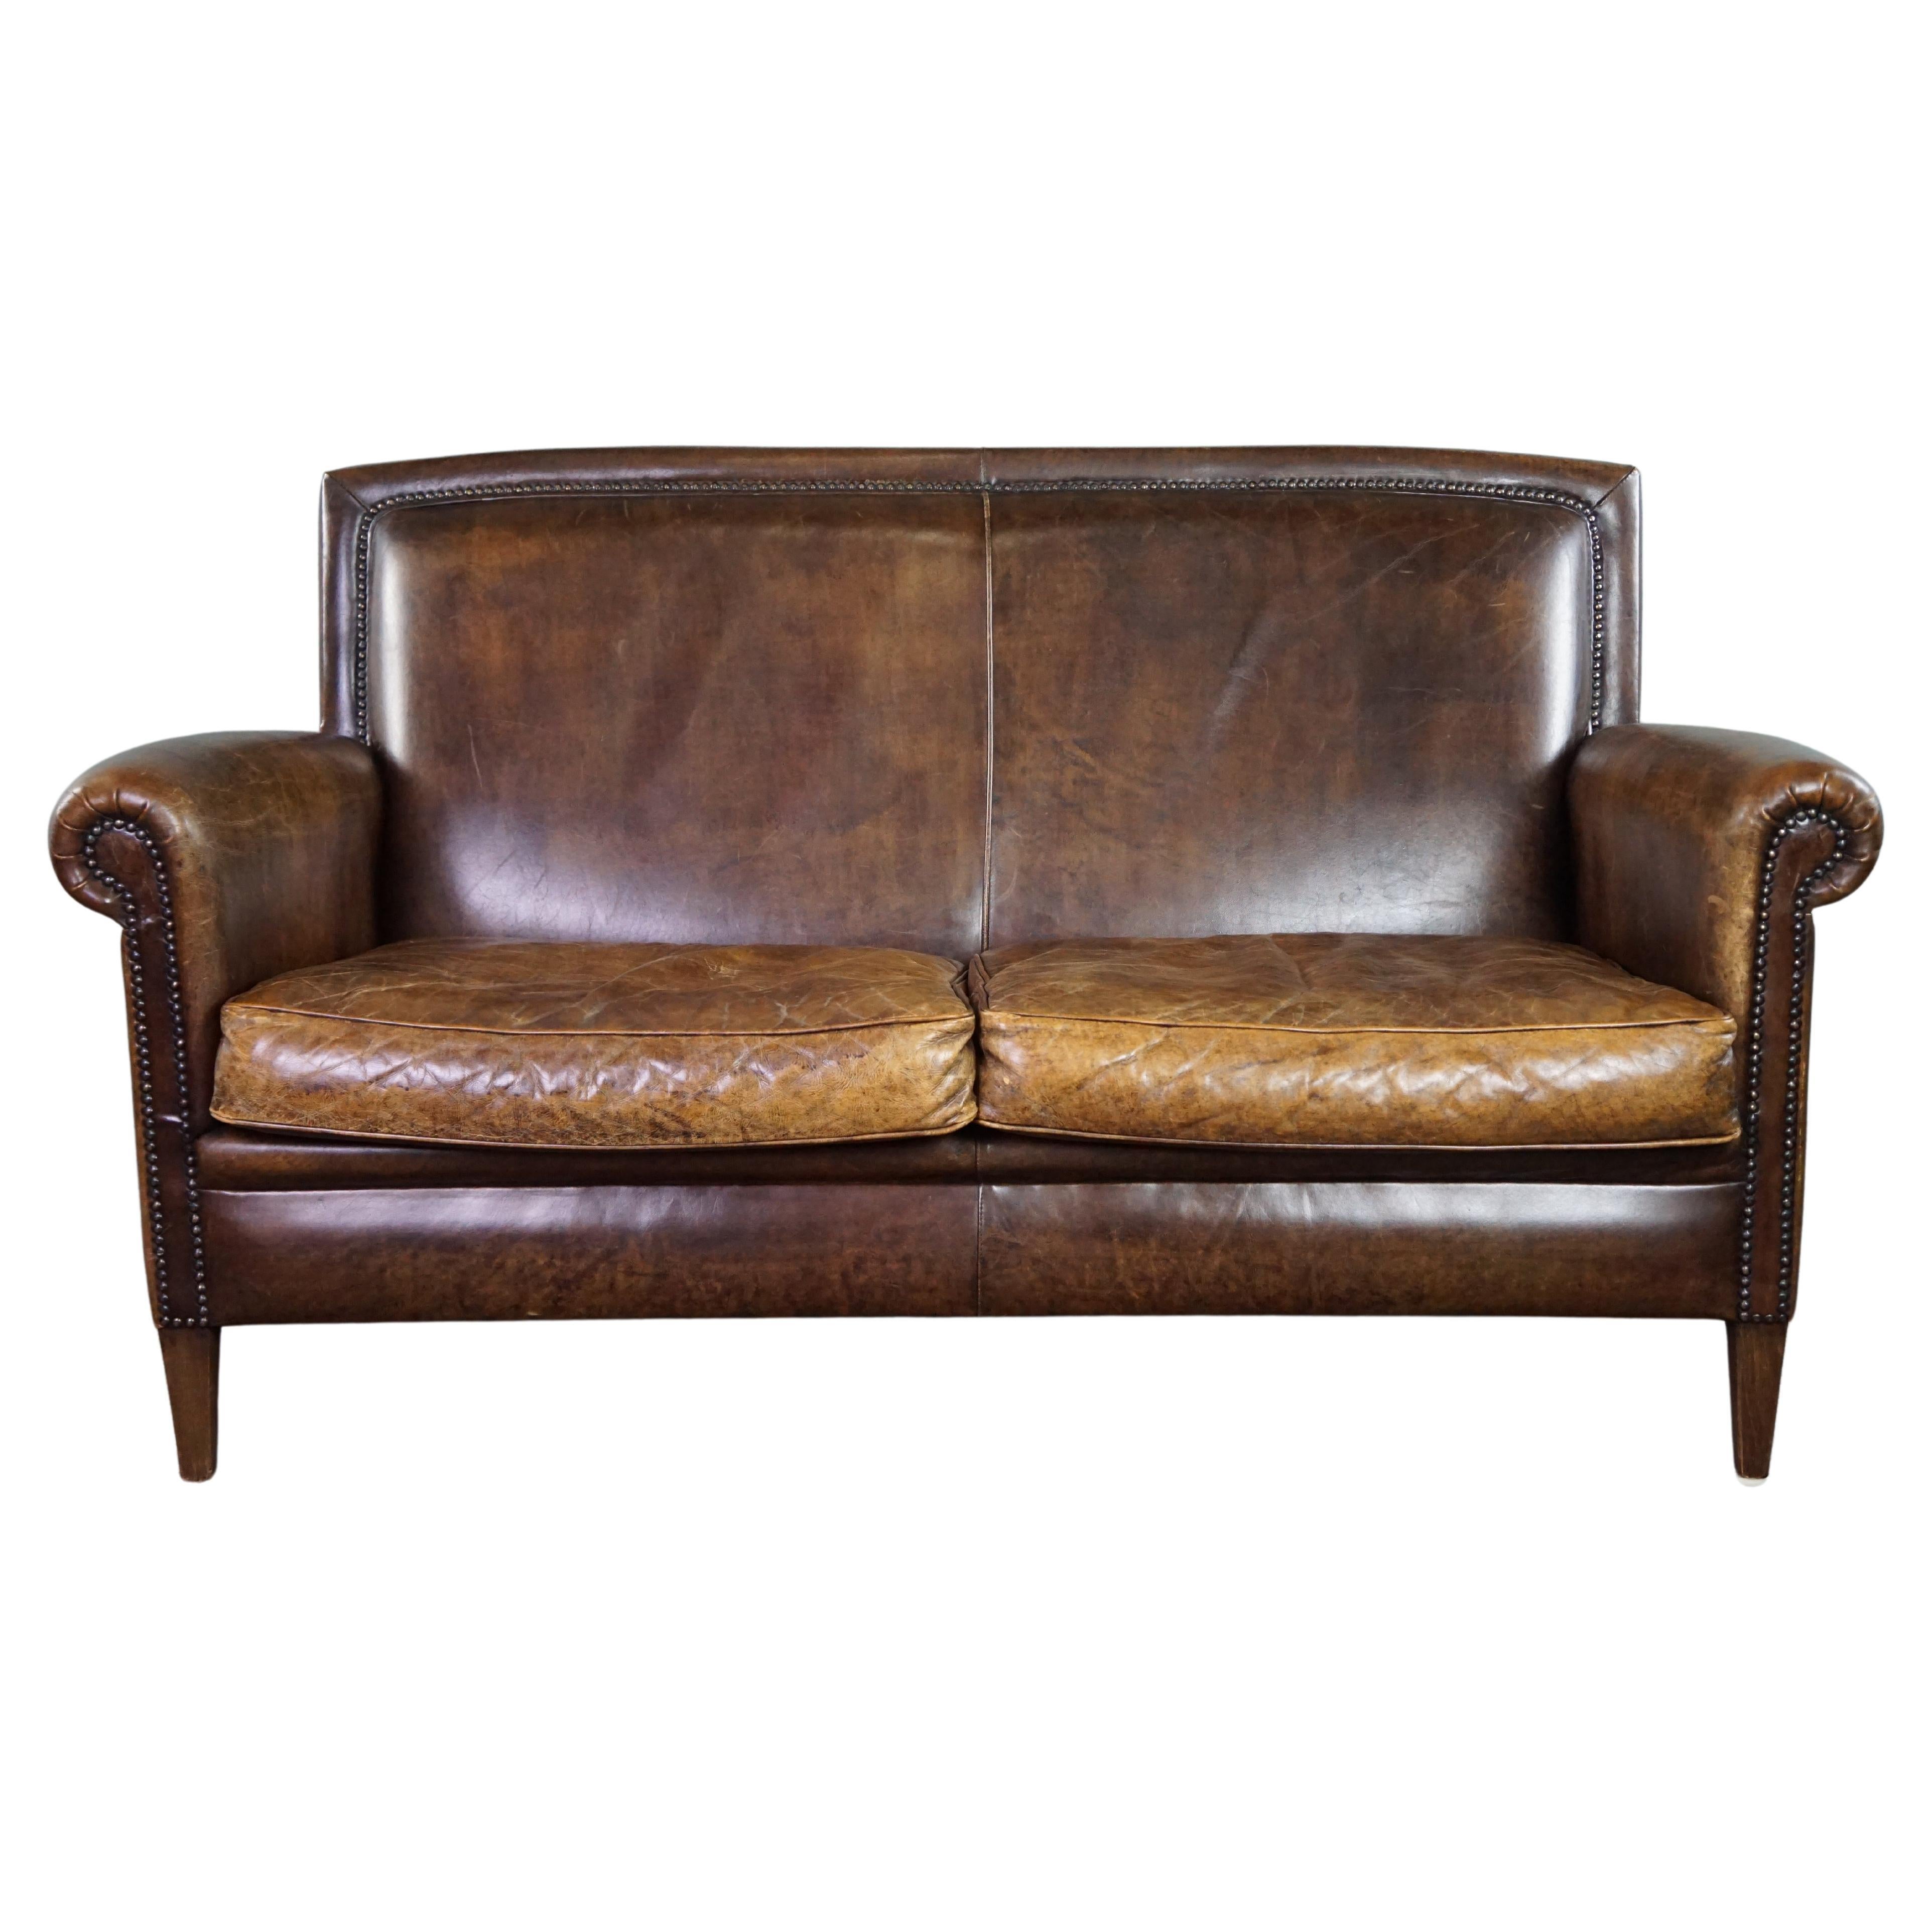 Beautiful dark cognac-colored cowhide 2-seater sofa in classic English style For Sale